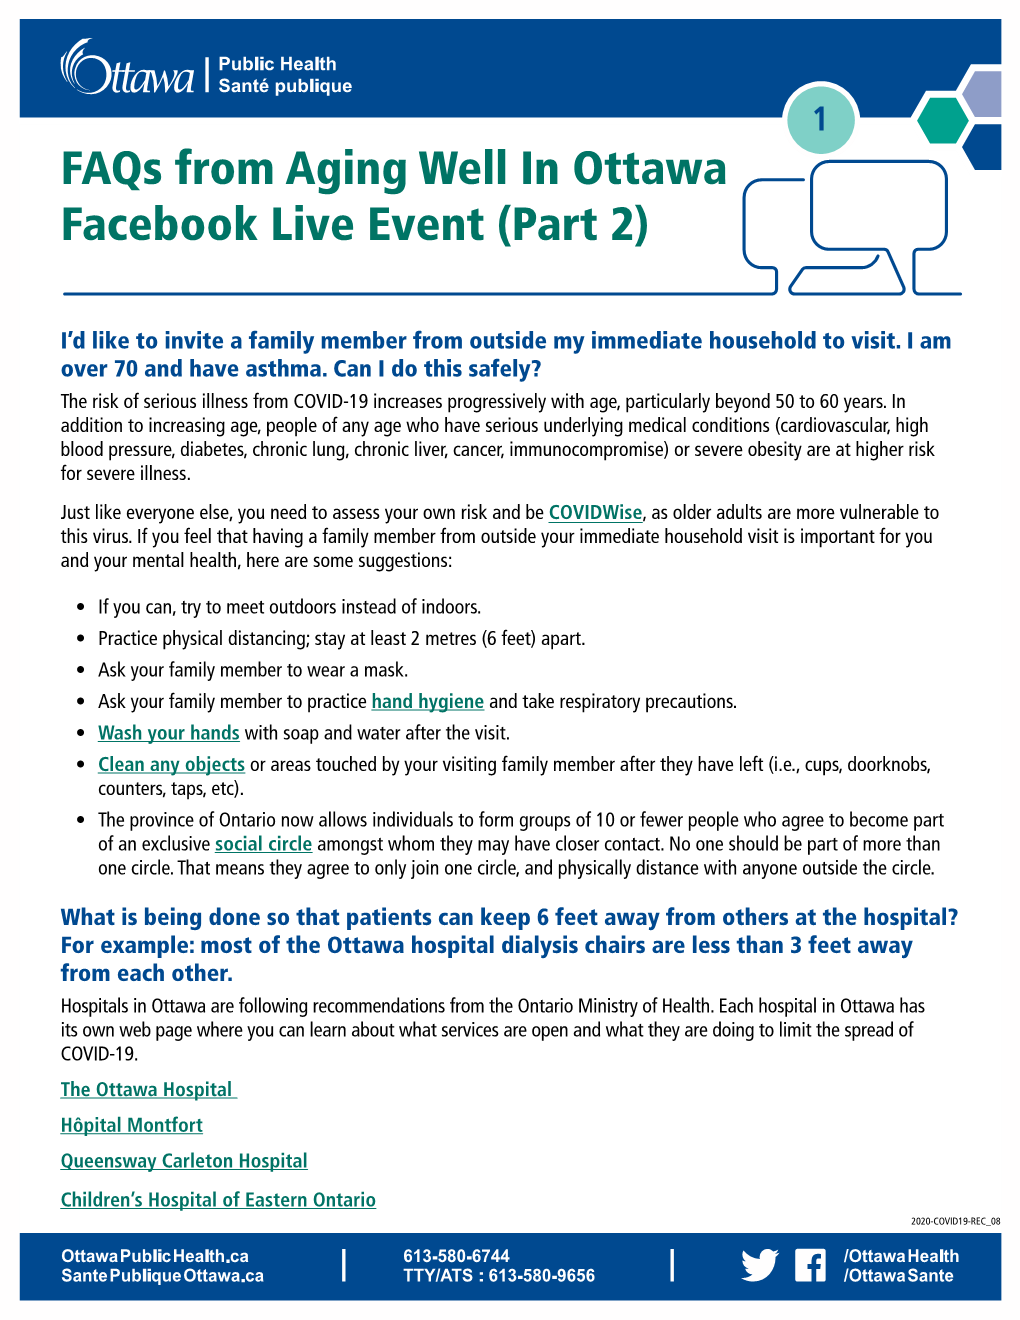 Faqs from Aging Well in Ottawa Facebook Live Event (Part 2)